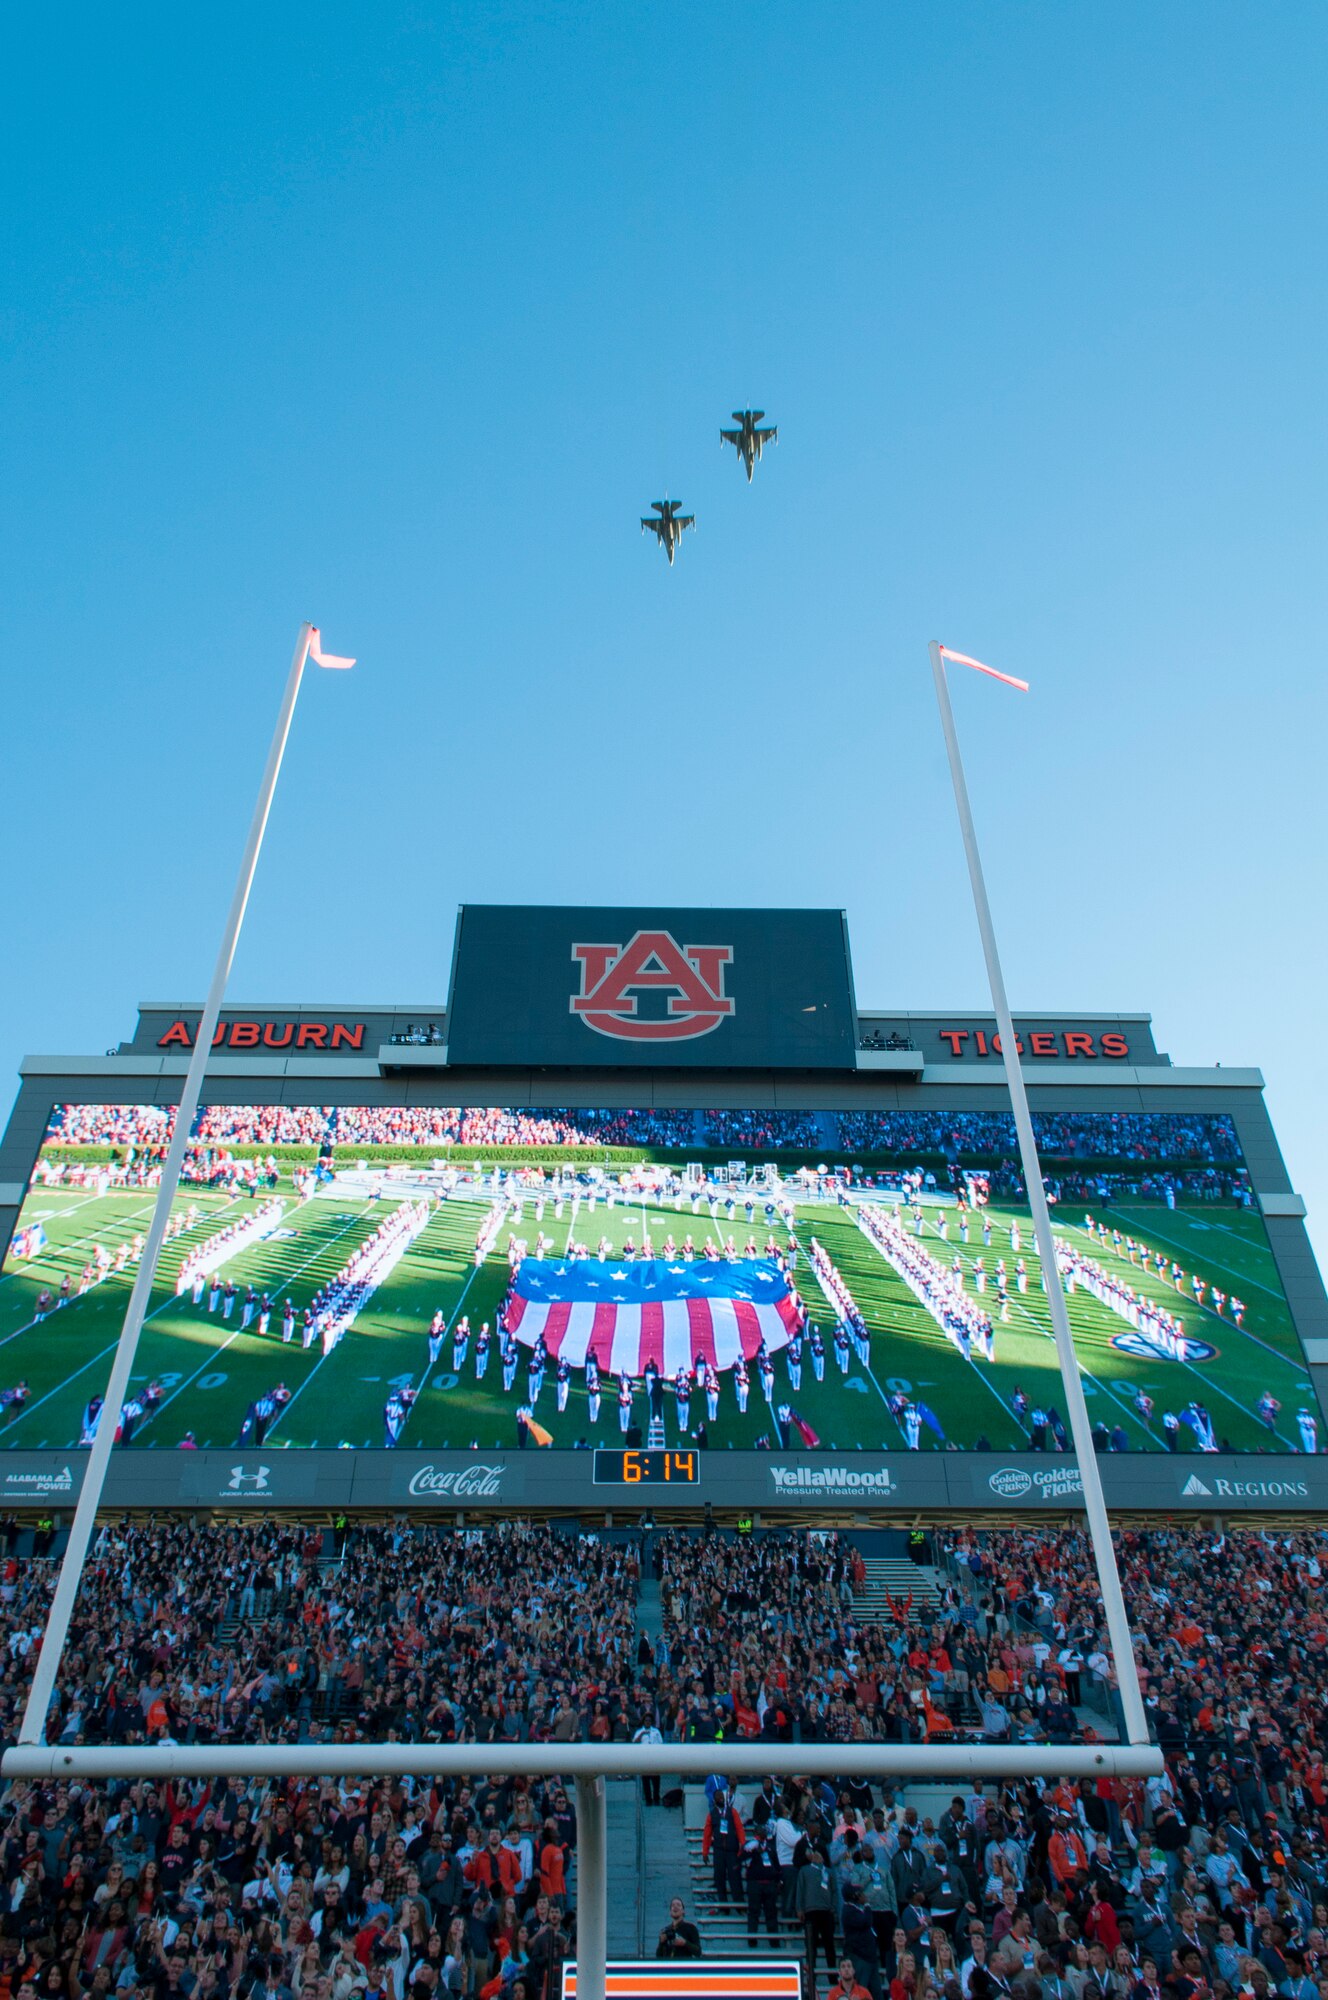 Two F-16 Fighting Falcon aircraft from the 187th Fighter Wing in Montgomery, Ala. perform the pregame flyover of the Auburn/Arkansas football game, October 22, 2016 at Jordan-Hare Stadium in Auburn, Ala. Auburn went on to win the football game 56-3. (US Air National Guard photo by Staff Sgt. Jared Rand)